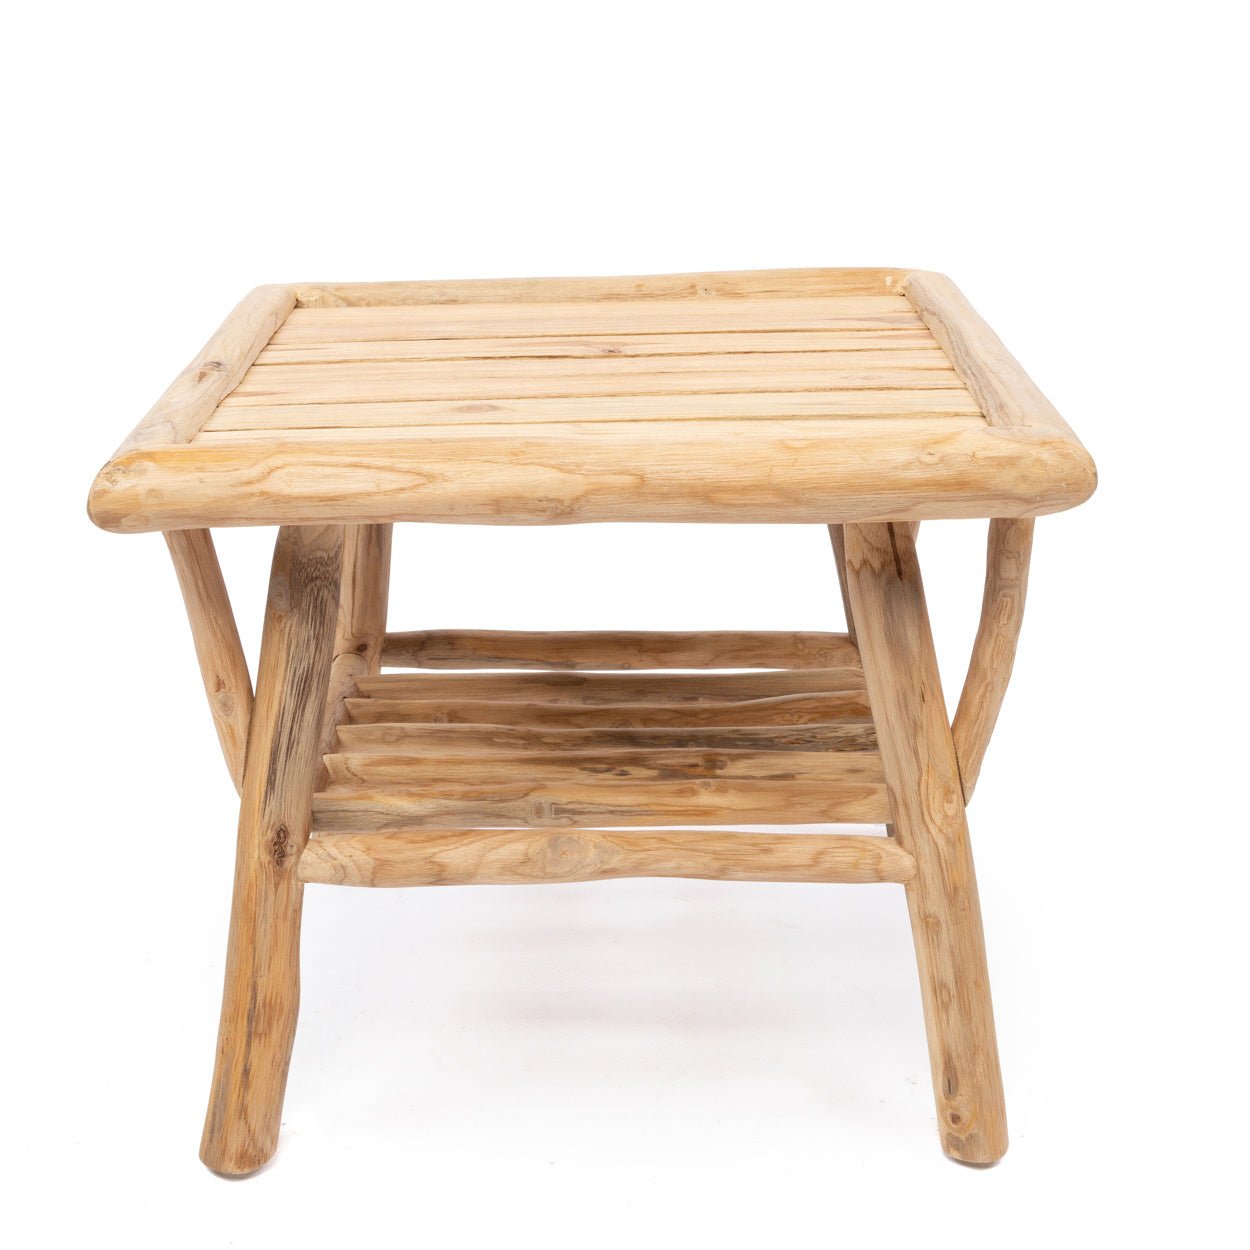 The Tulum Side Table - Natural